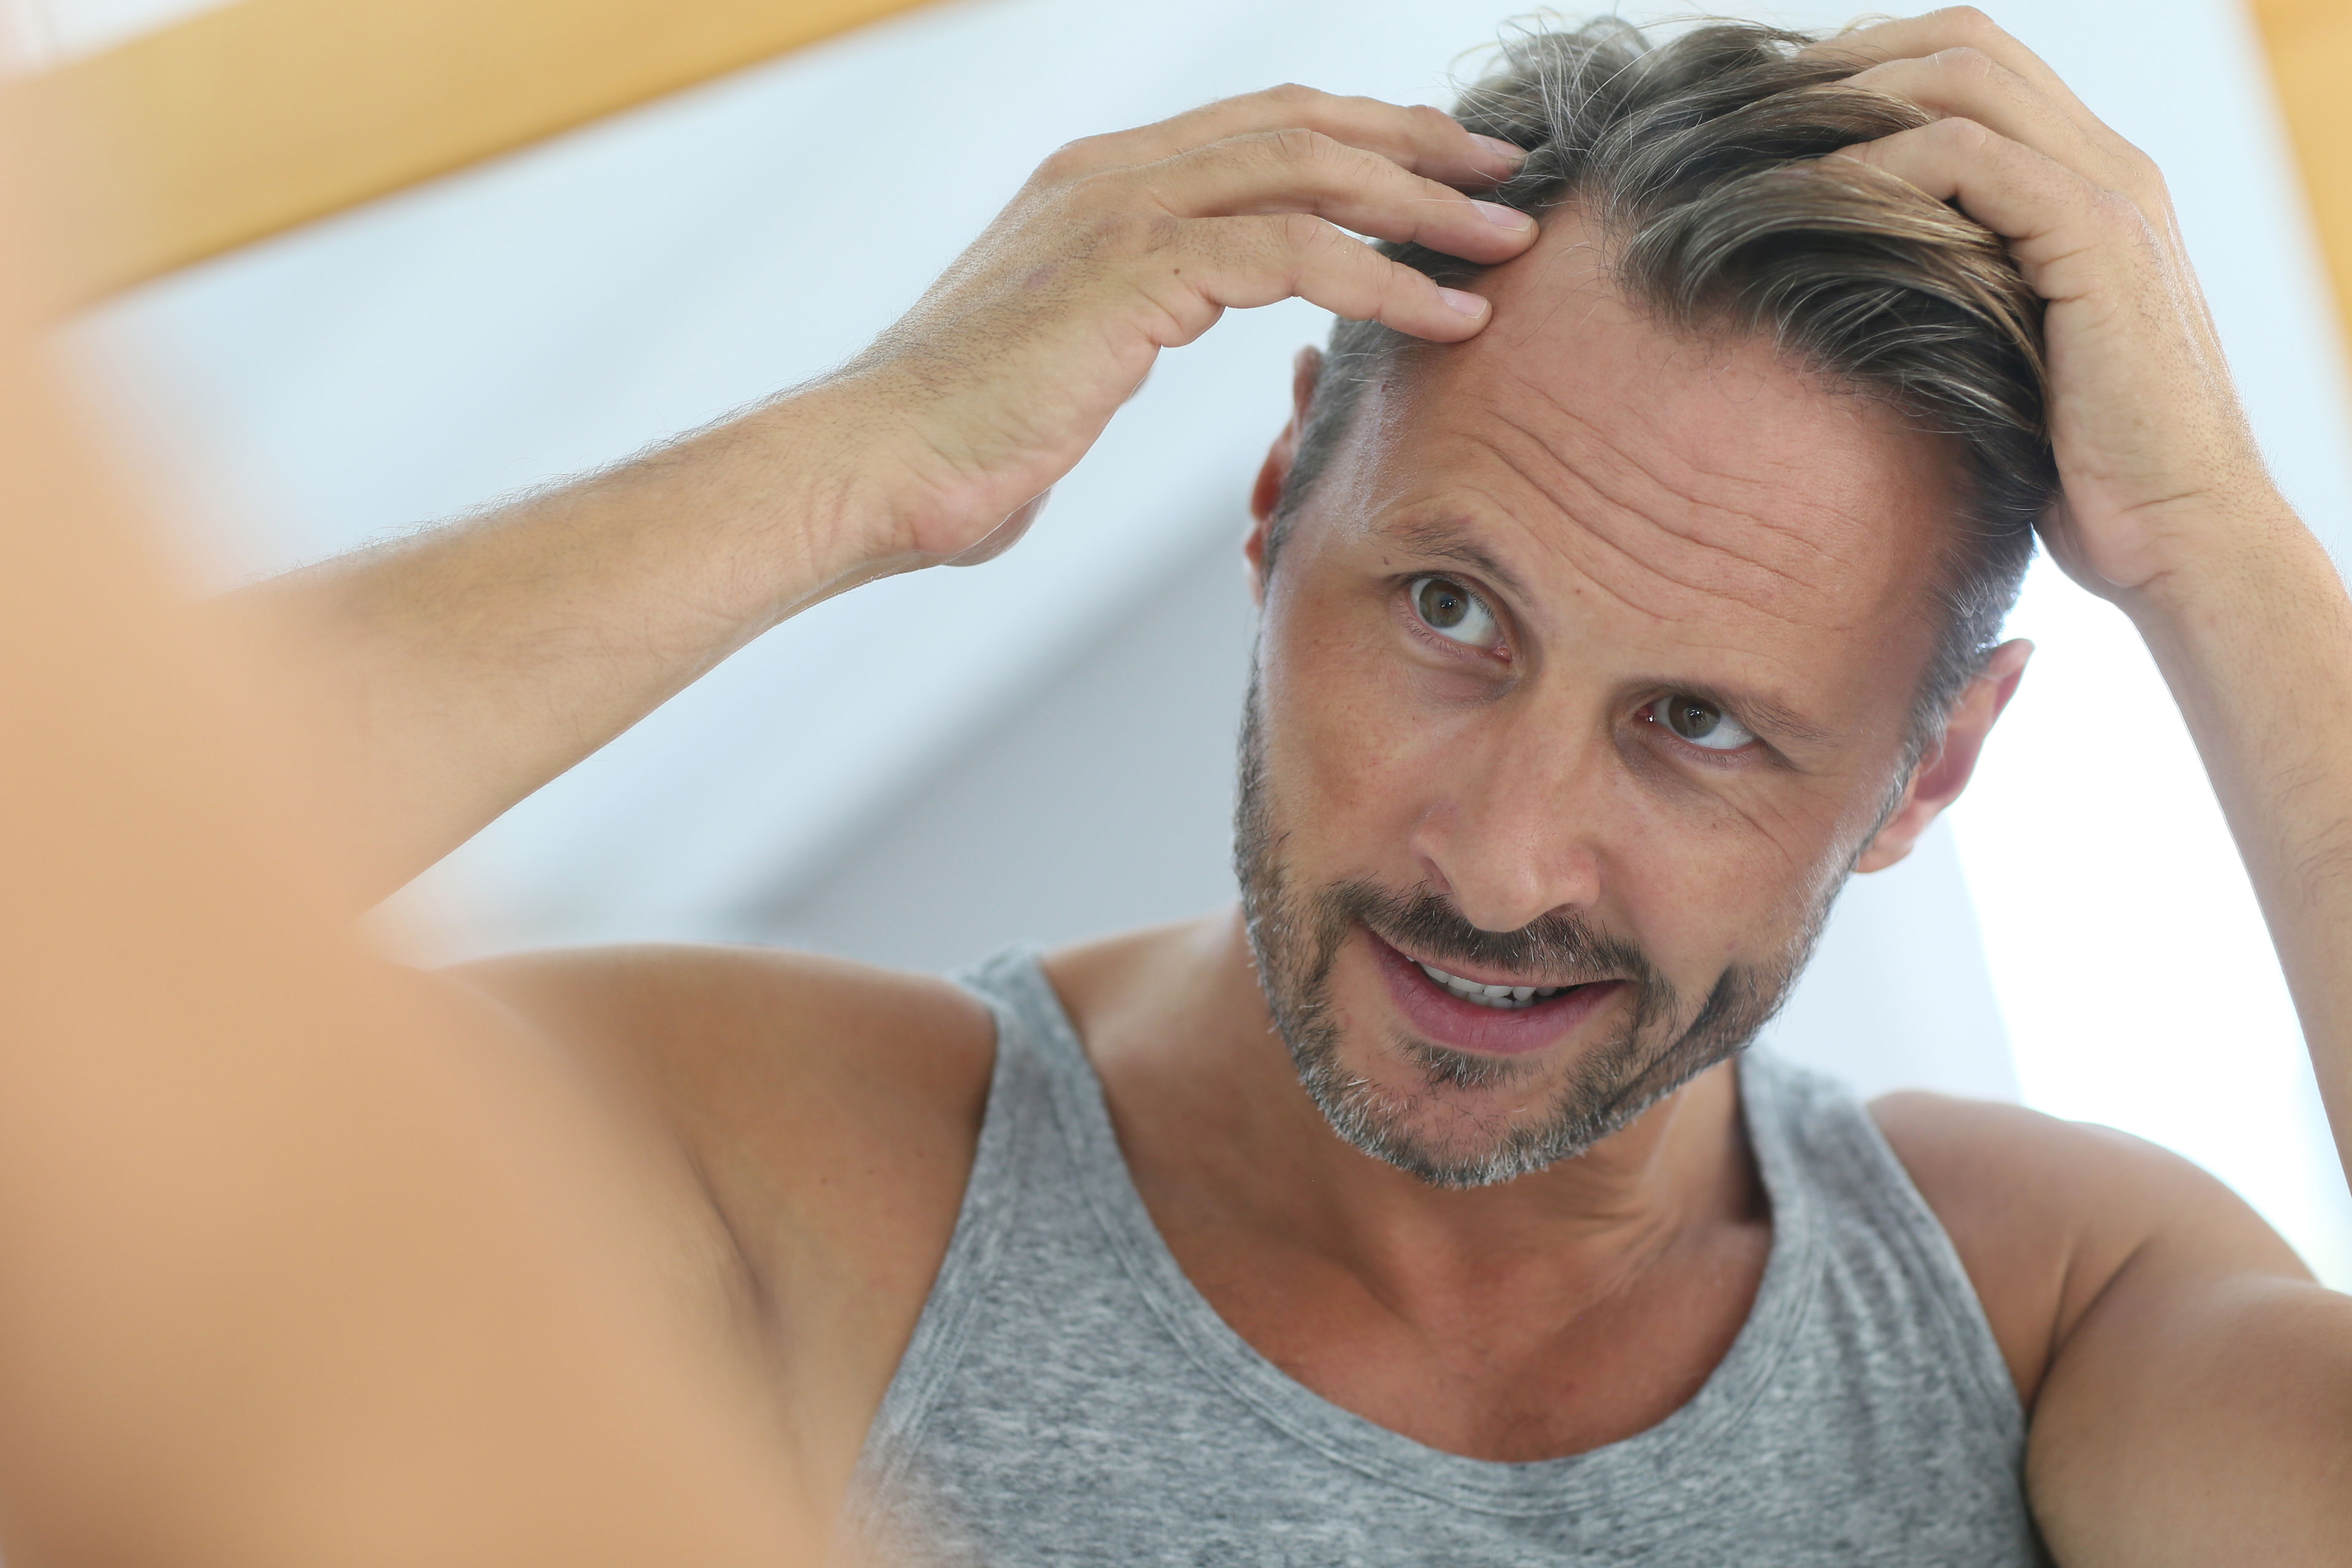 advanced hair transplant questions stress linked to hair loss